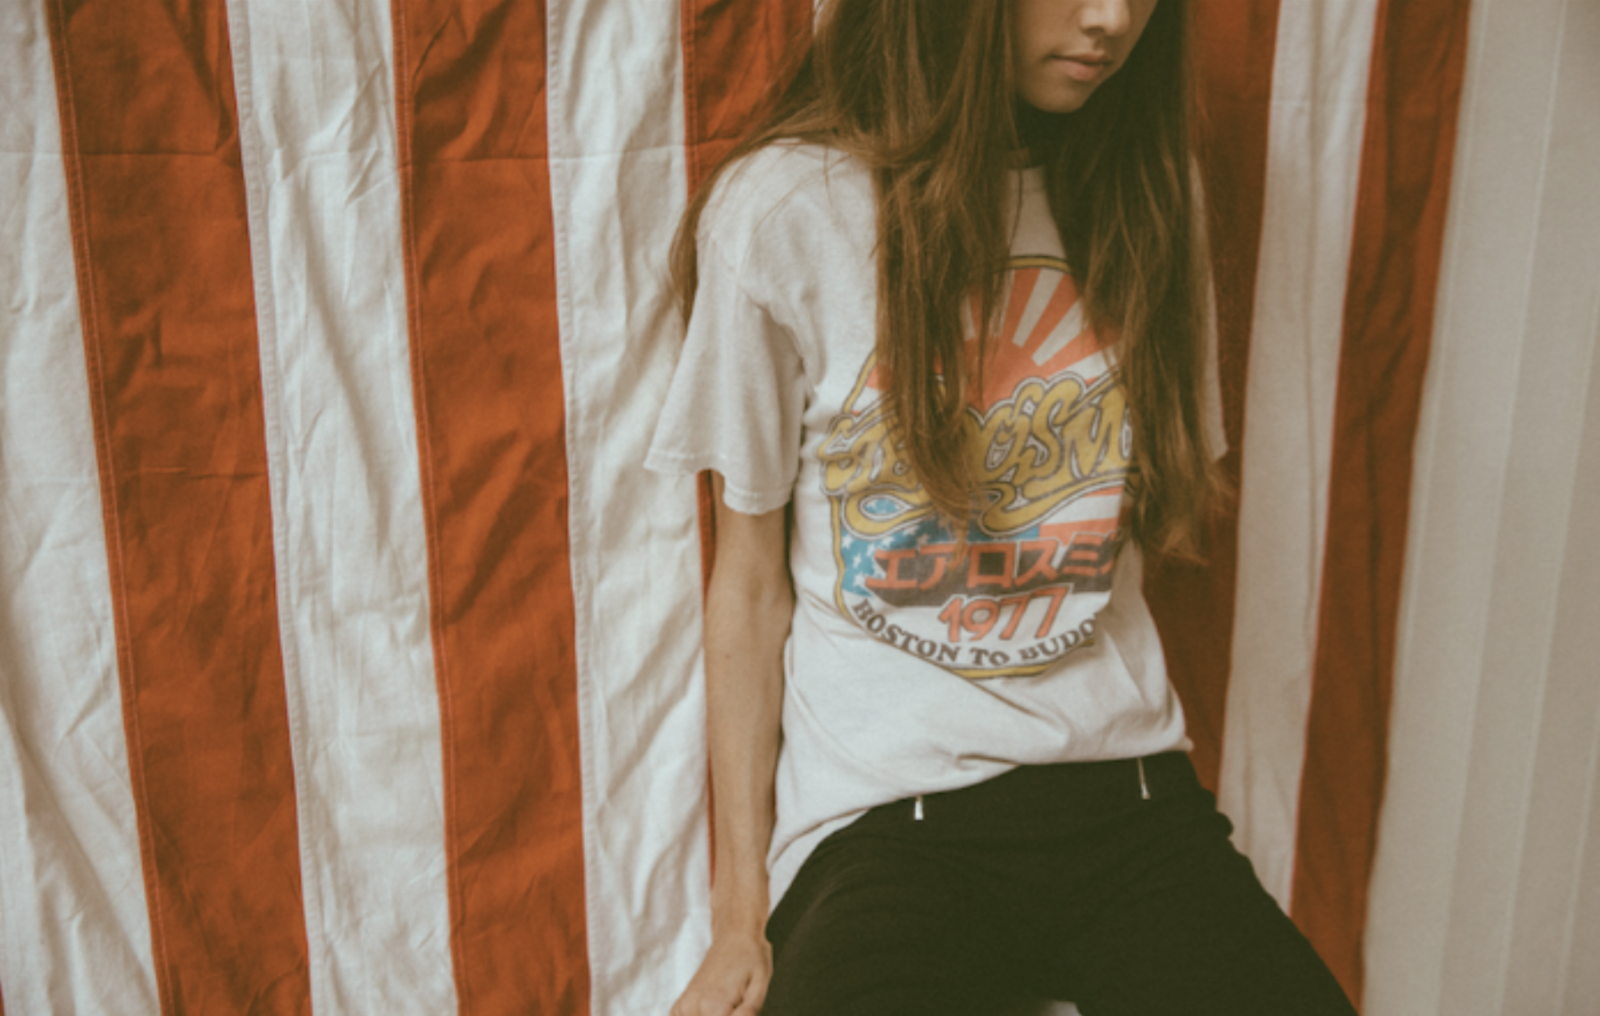 Brandy Melville: The Controversial Brand that Sells Exactly What